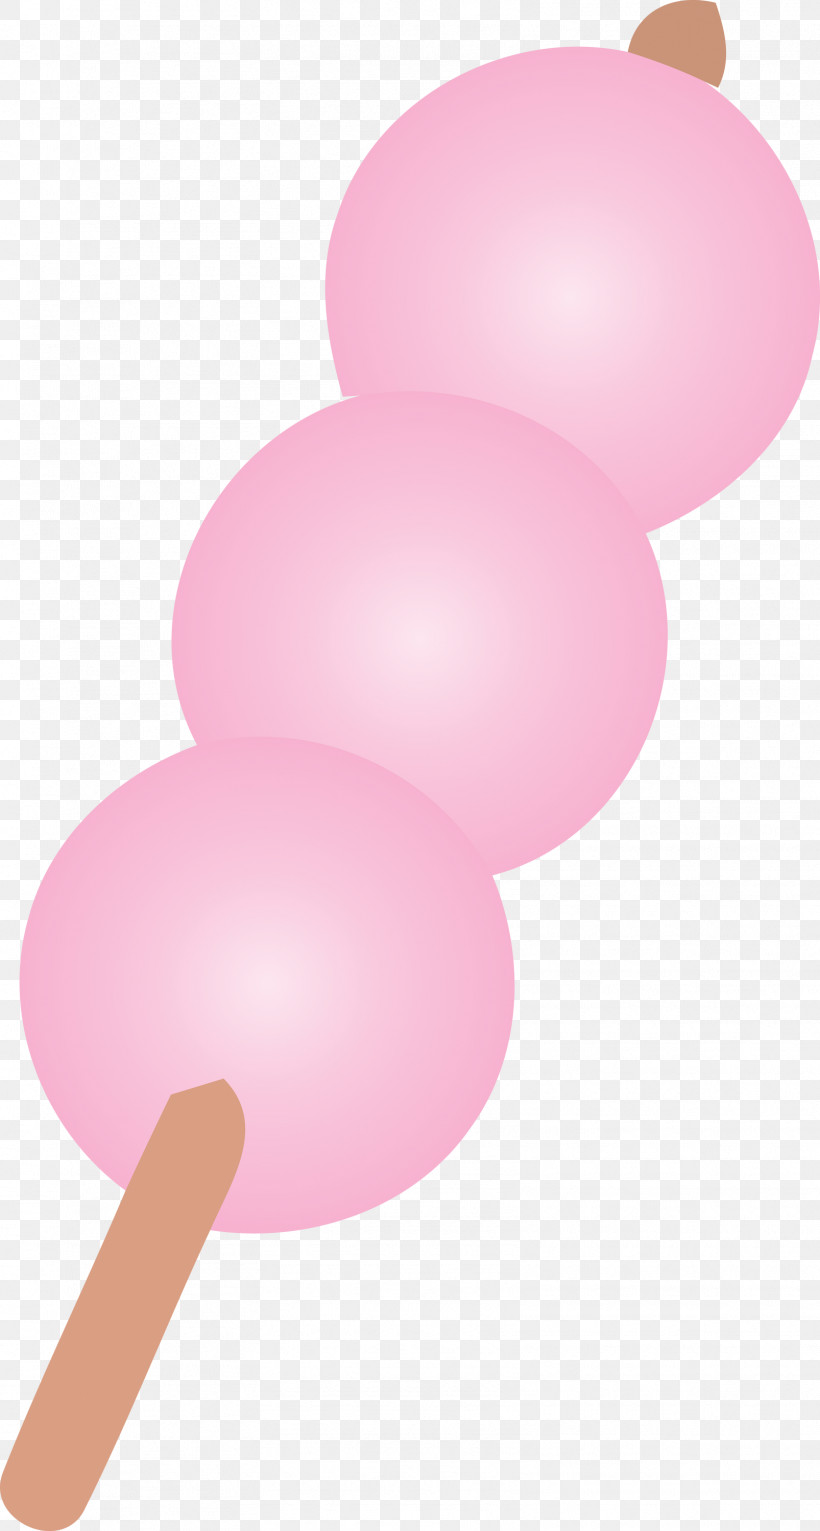 Dango Food, PNG, 1606x3000px, Dango, Balloon, Food, Material Property, Party Supply Download Free